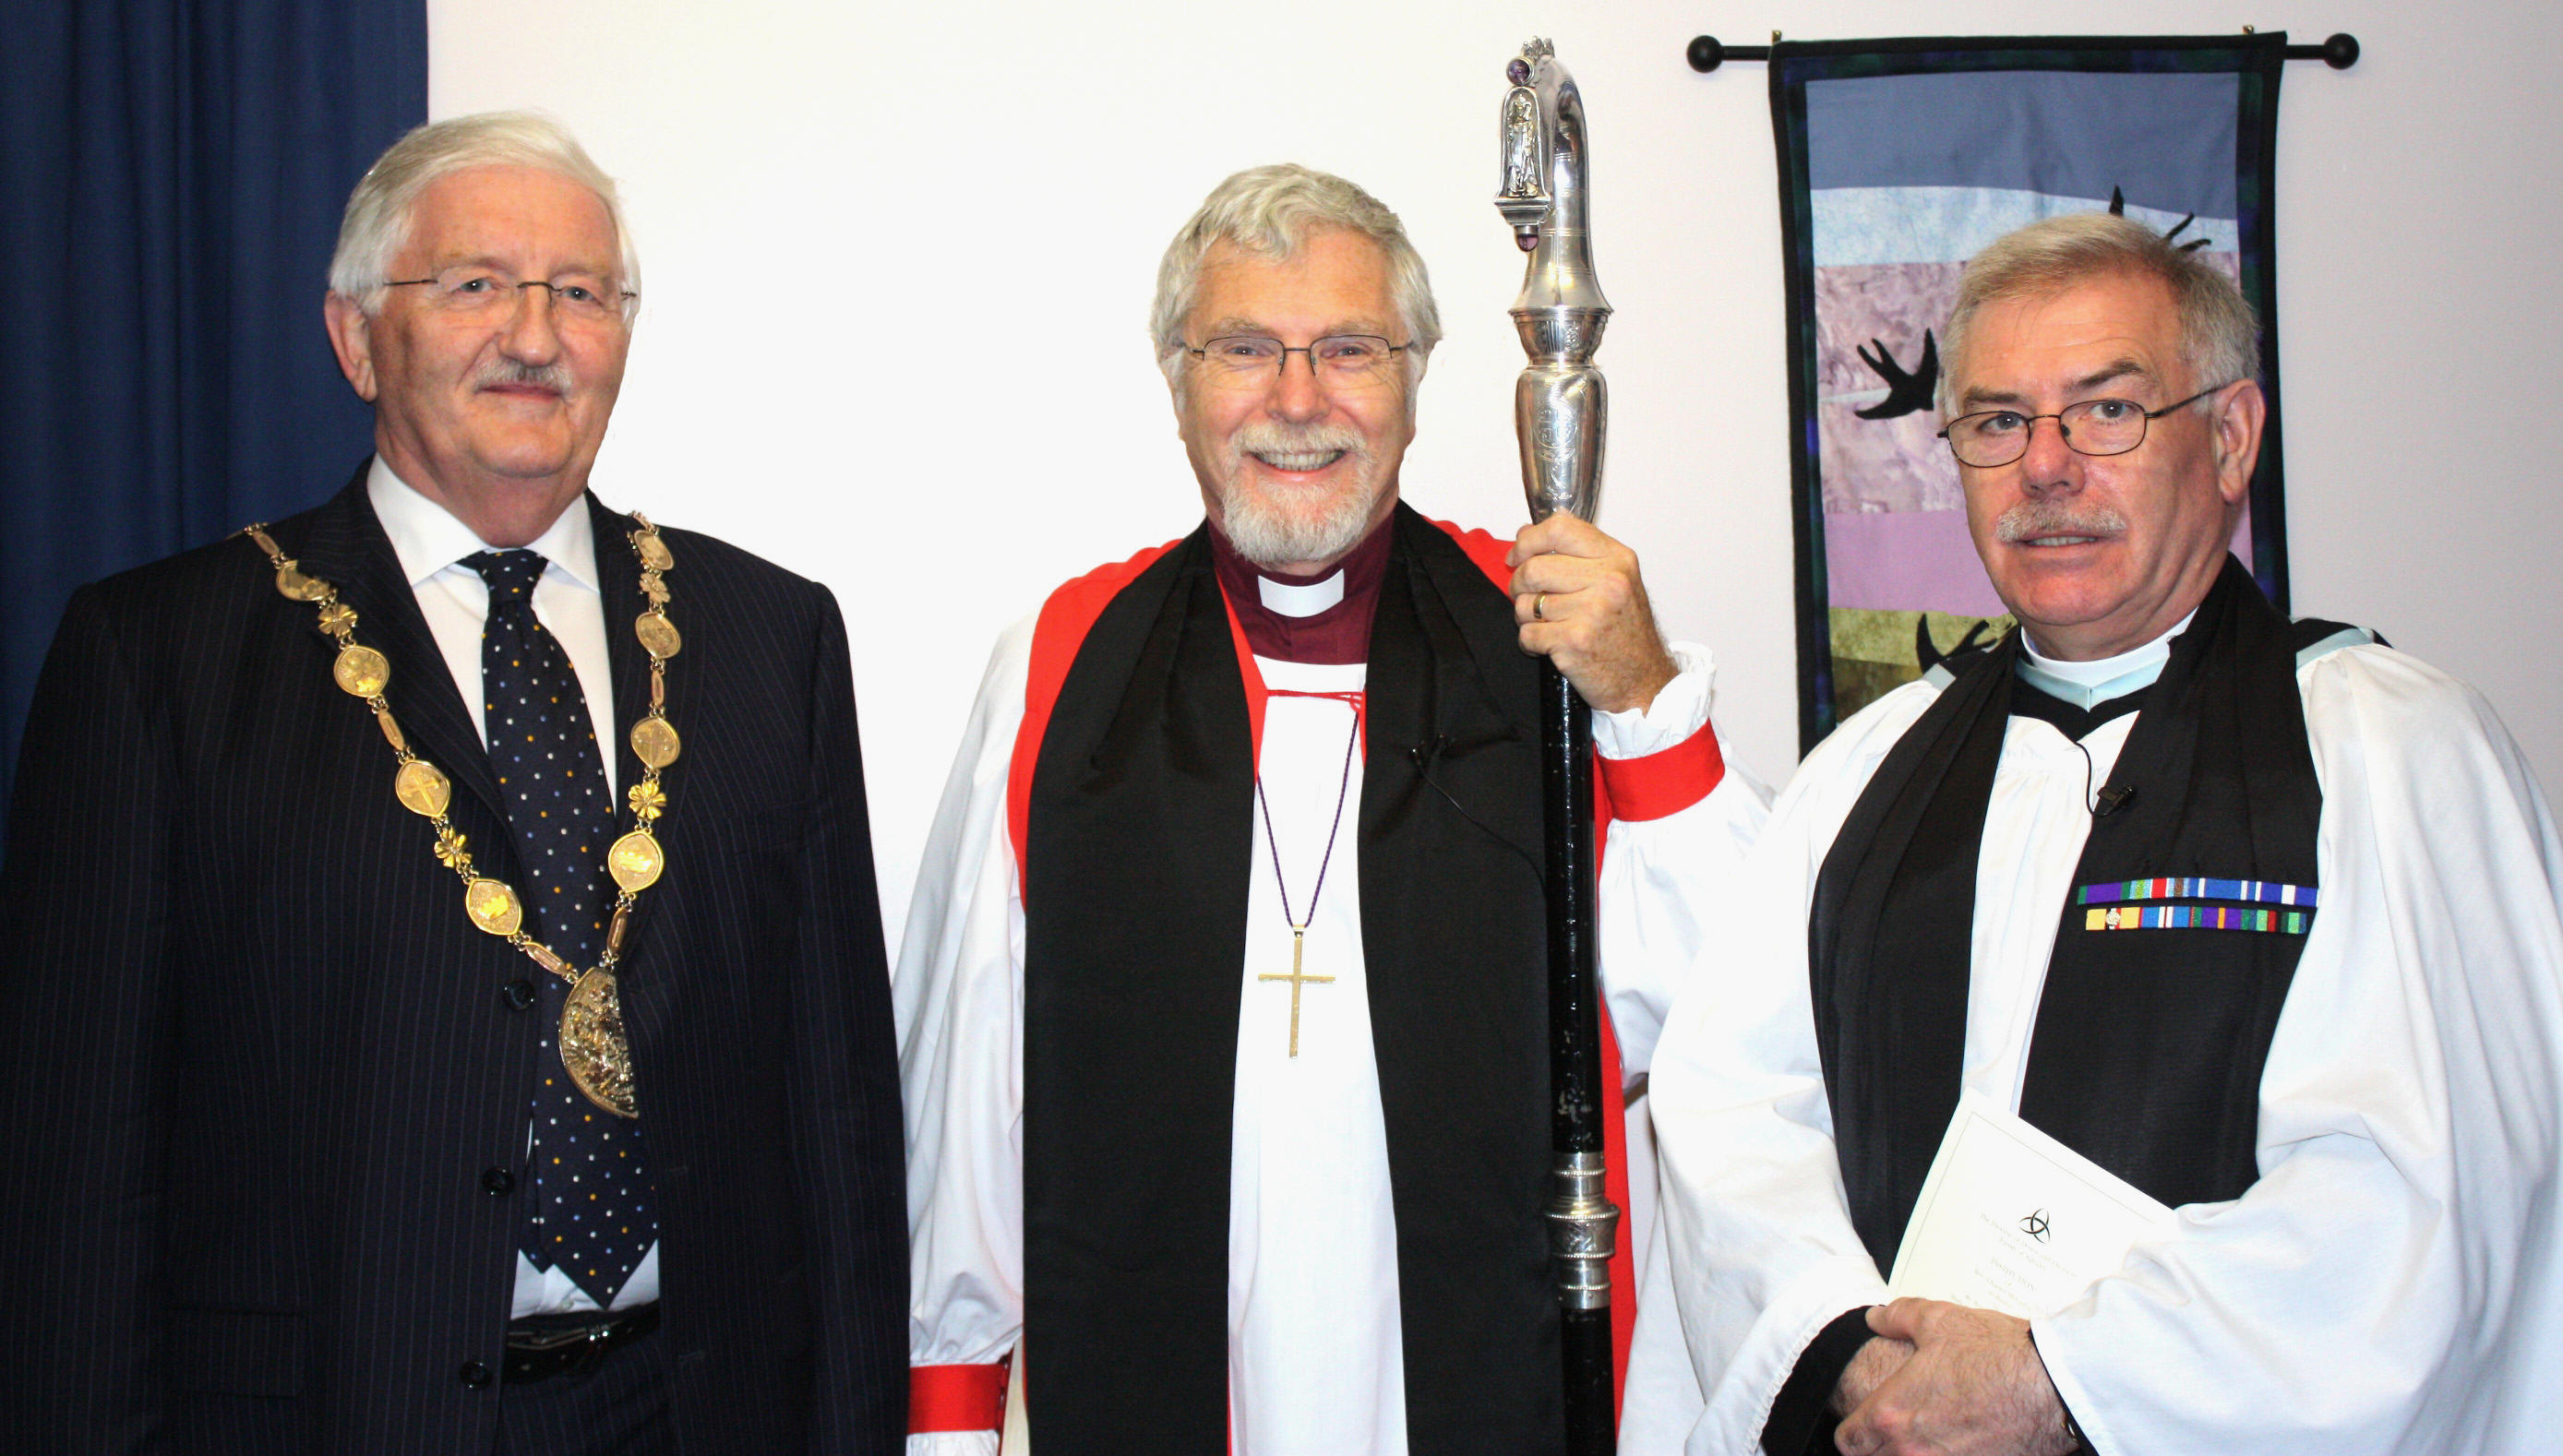 Lisburn Mayor, Cllr Ronnie Crawford pictured with the Rt Revd Harold Miller (Bishop of Down and Dromore) and the new Rector of Aghalee, the Revd Charles McCartney.